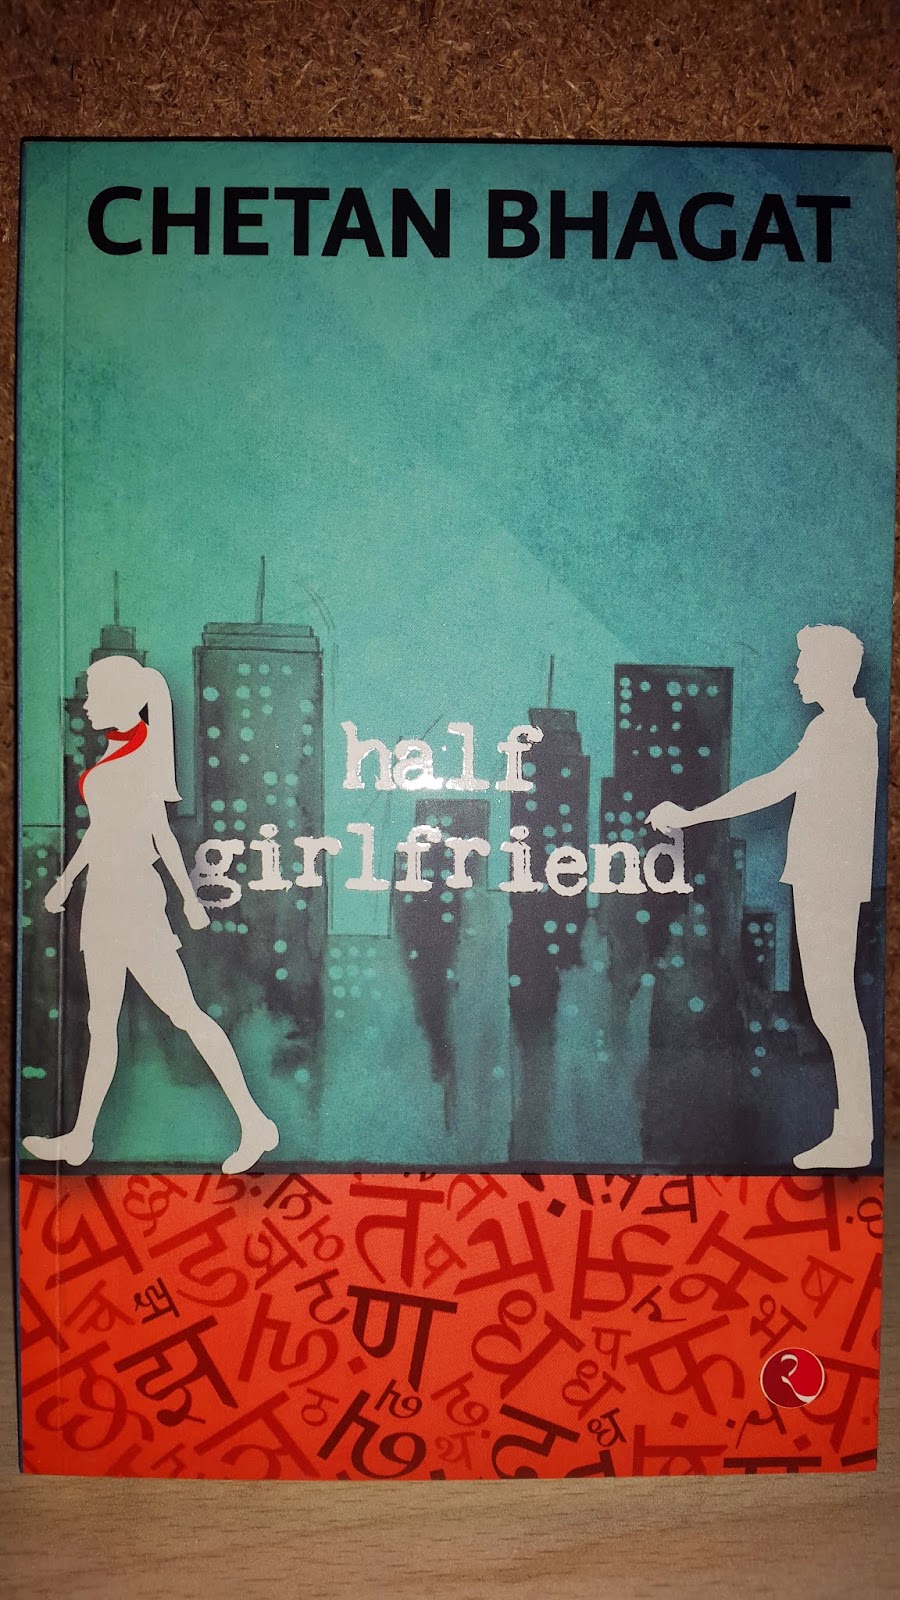 book review on half girlfriend